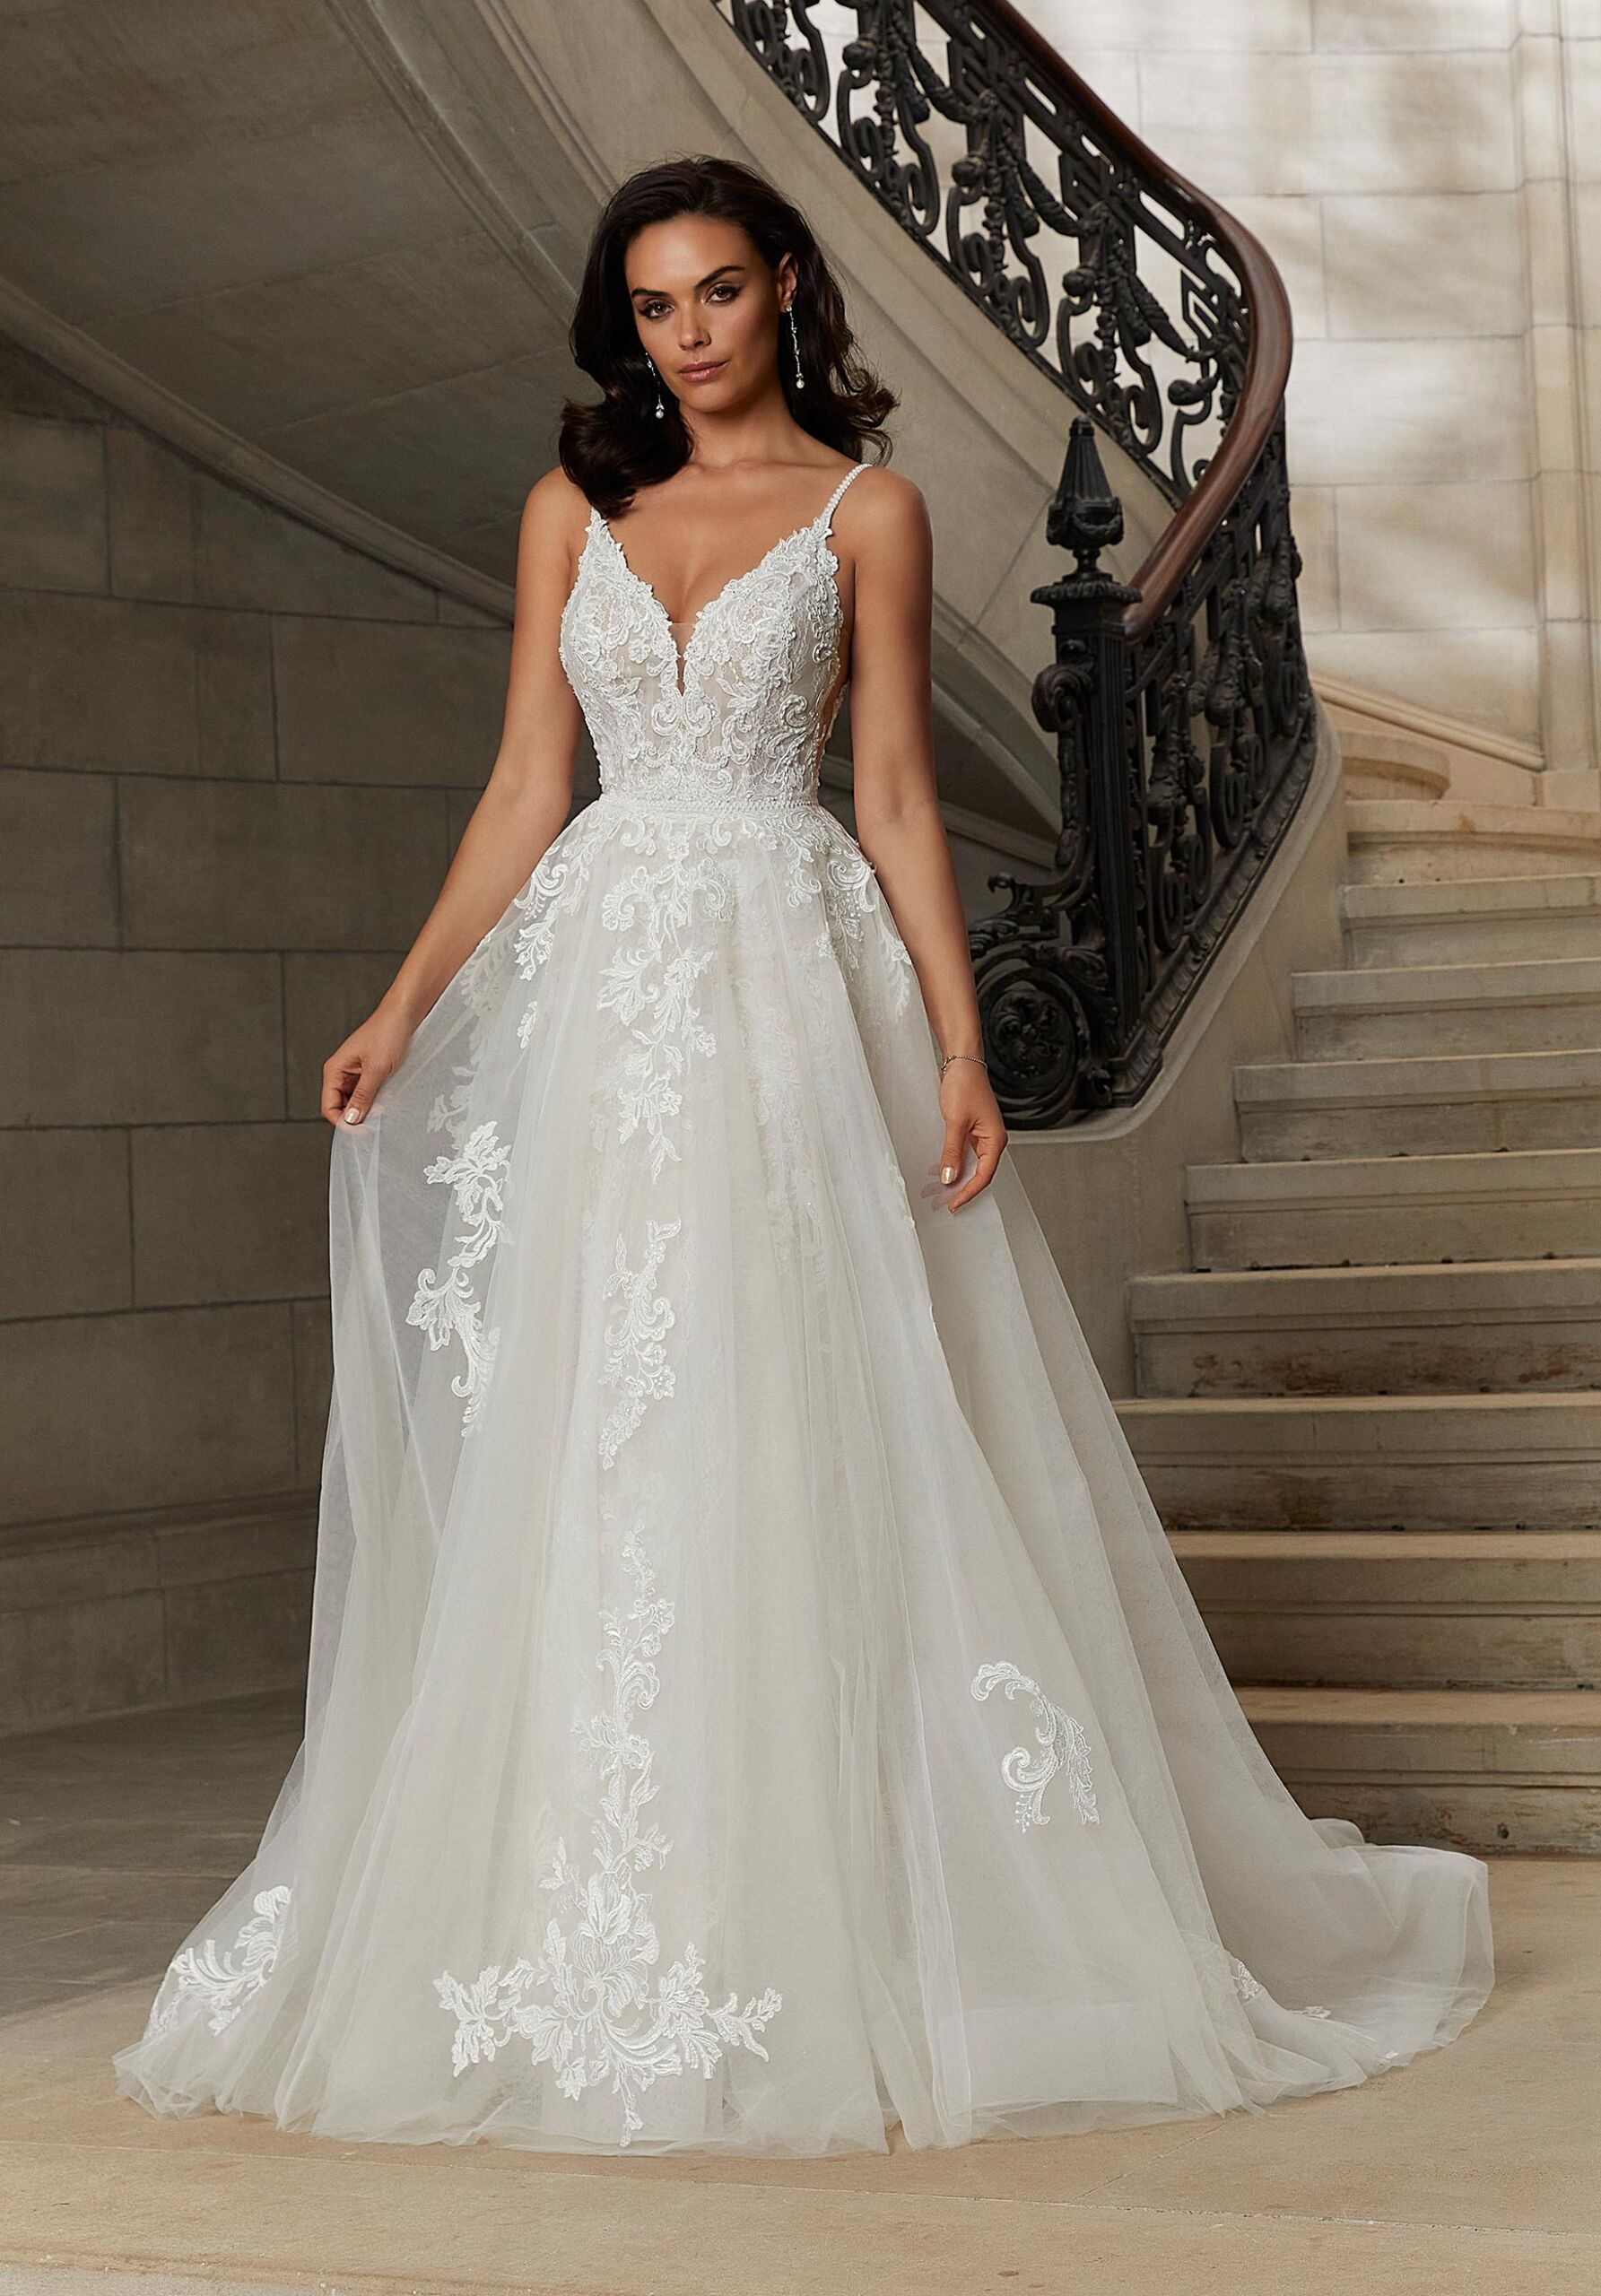 Morilee - Lace-Trimmed Tulle Overskirt - STYLE #11355